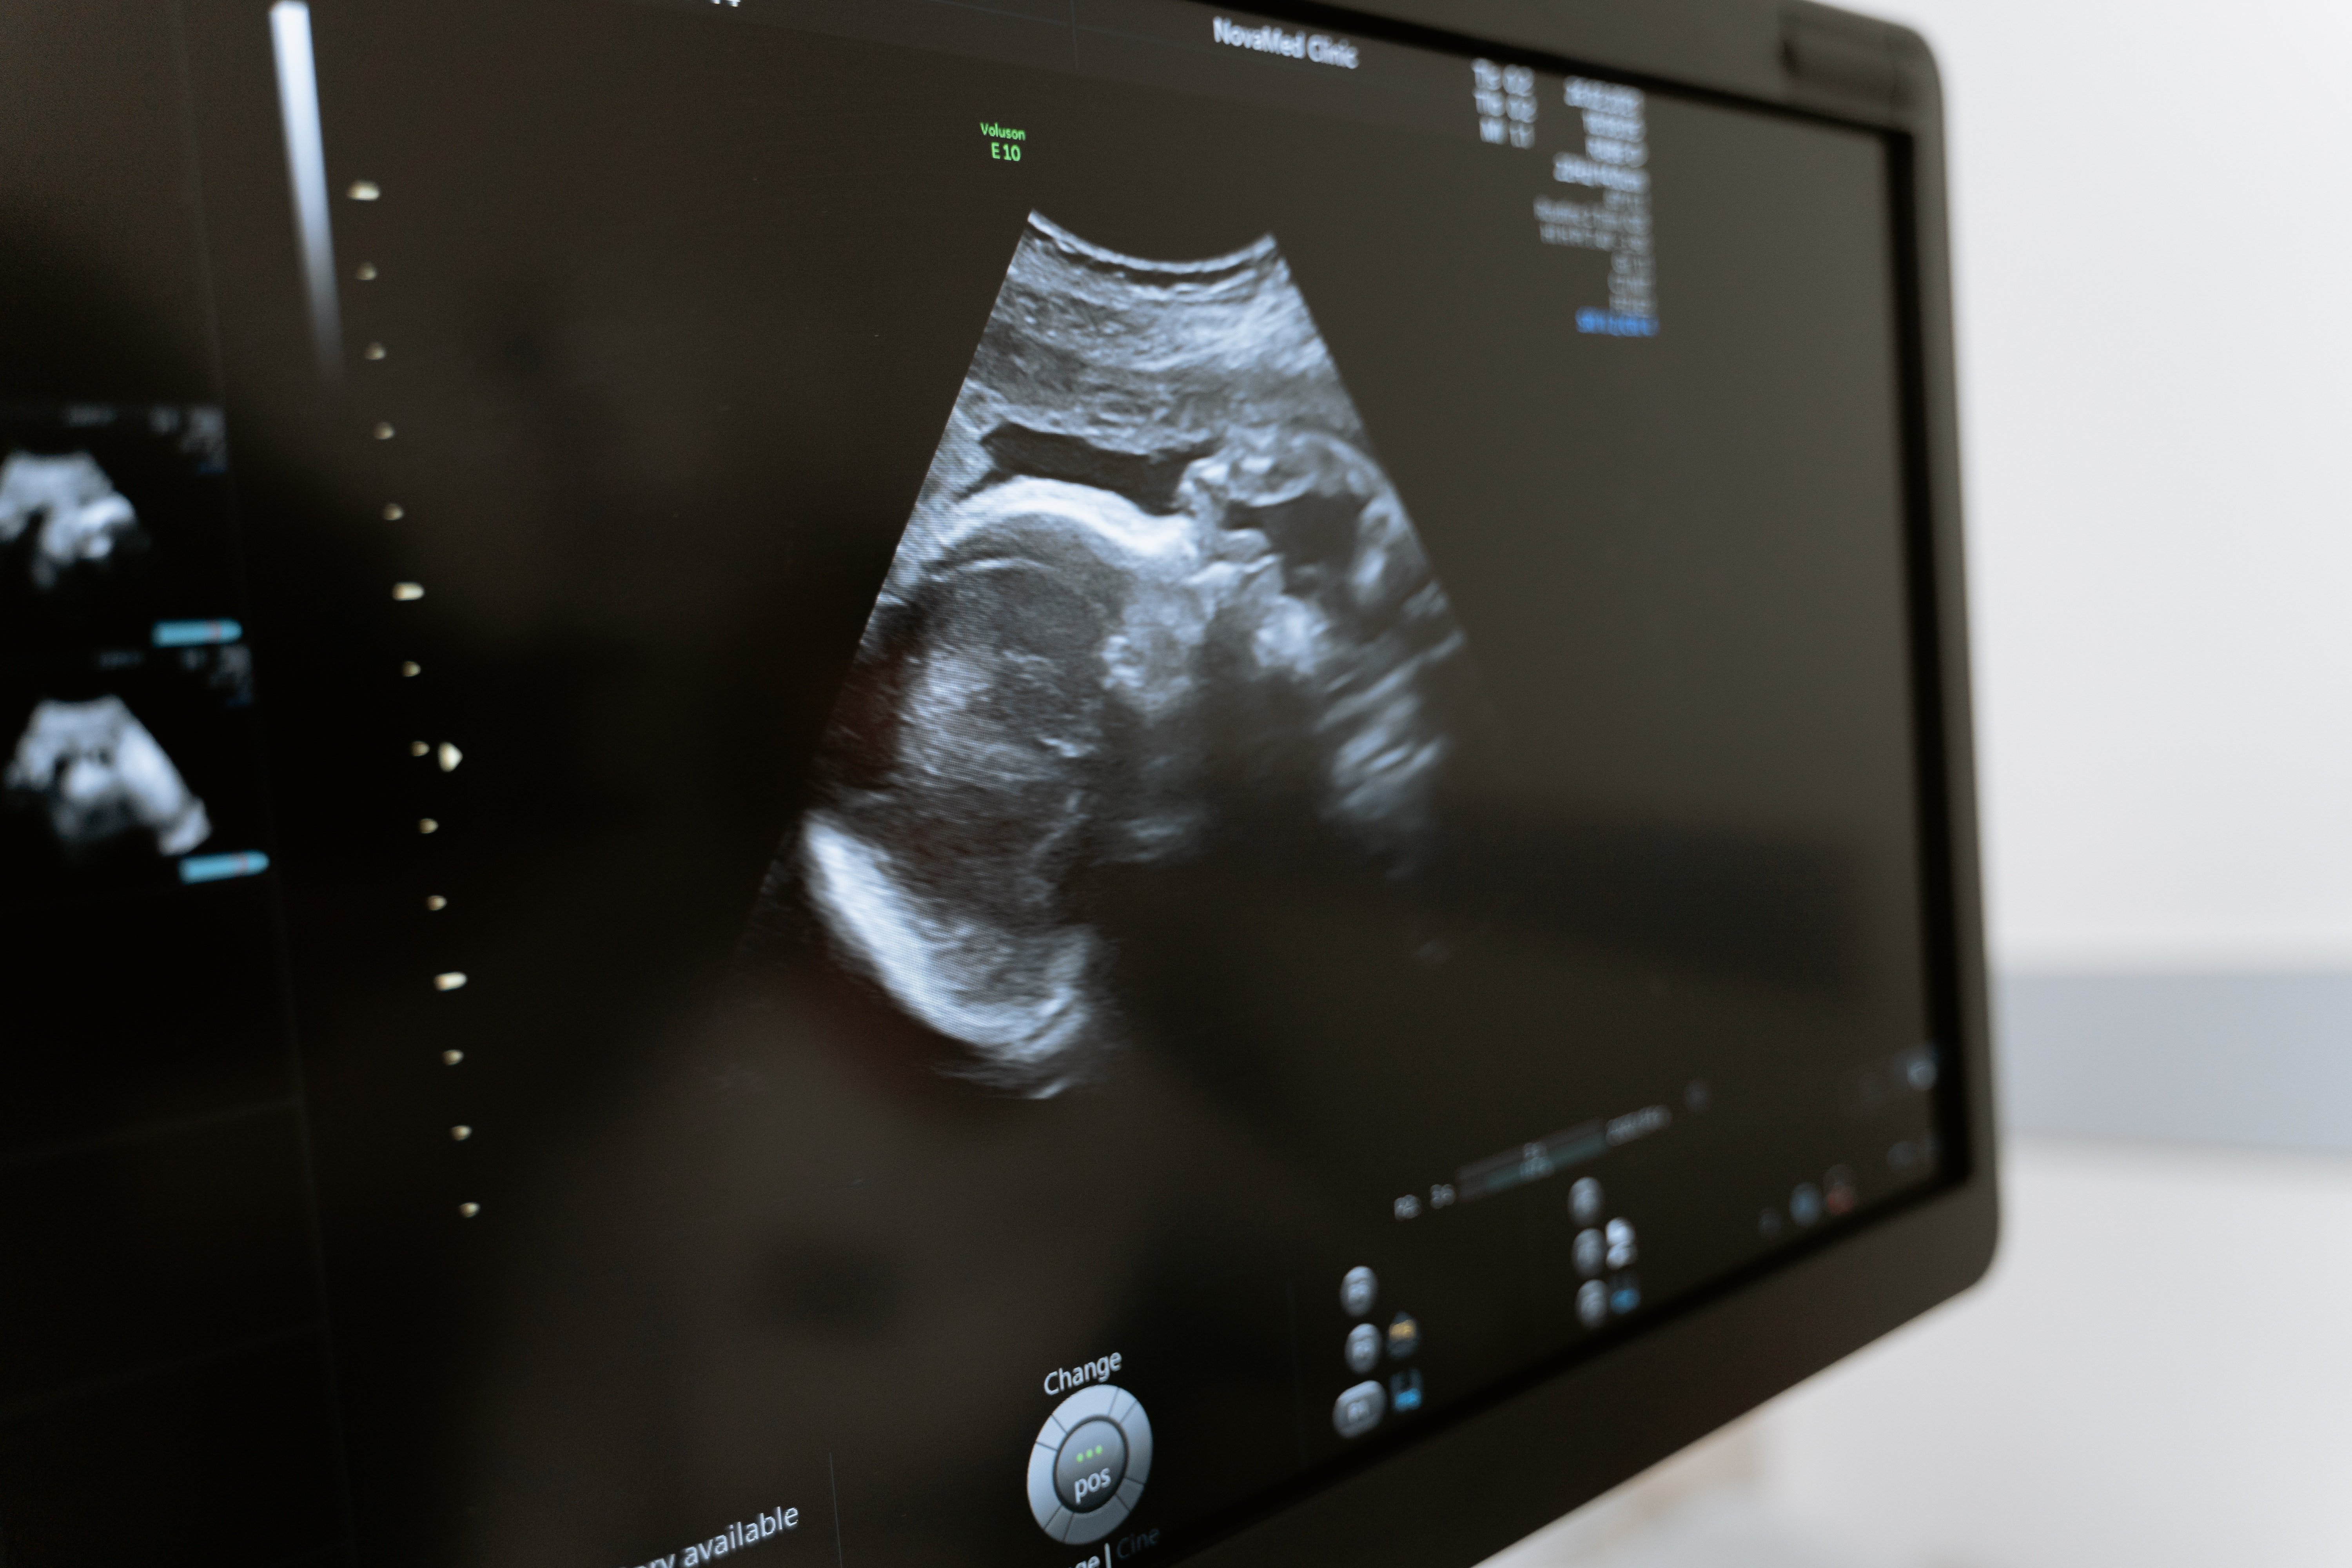 An ultrasound picture on a computer screen | Source: Pexels